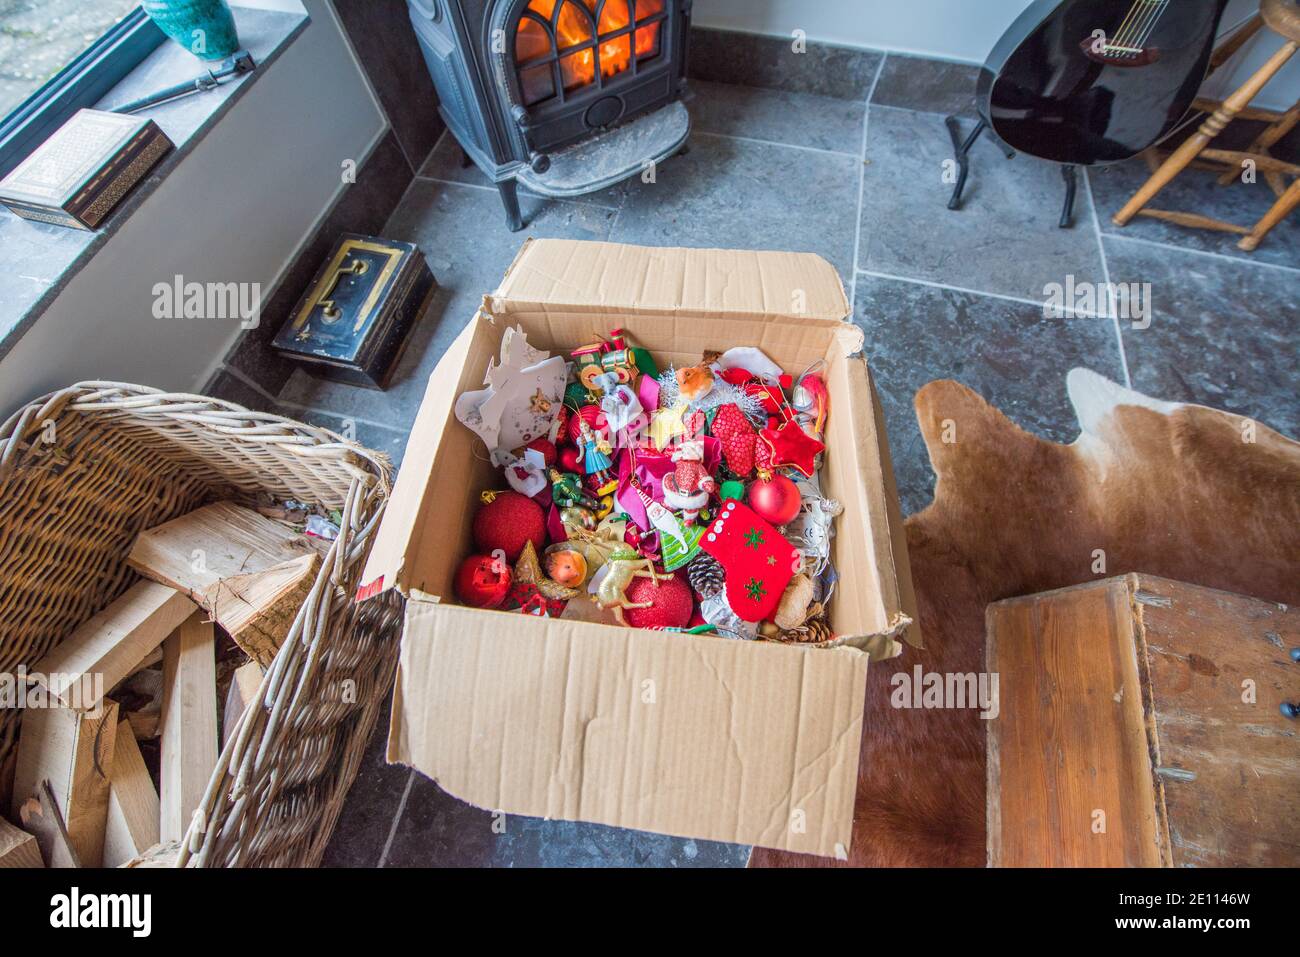 Brown cardboard box with a jumble of family colourful Christmas tree decorations infront of a log burner on a stone floor being packed away Stock Photo